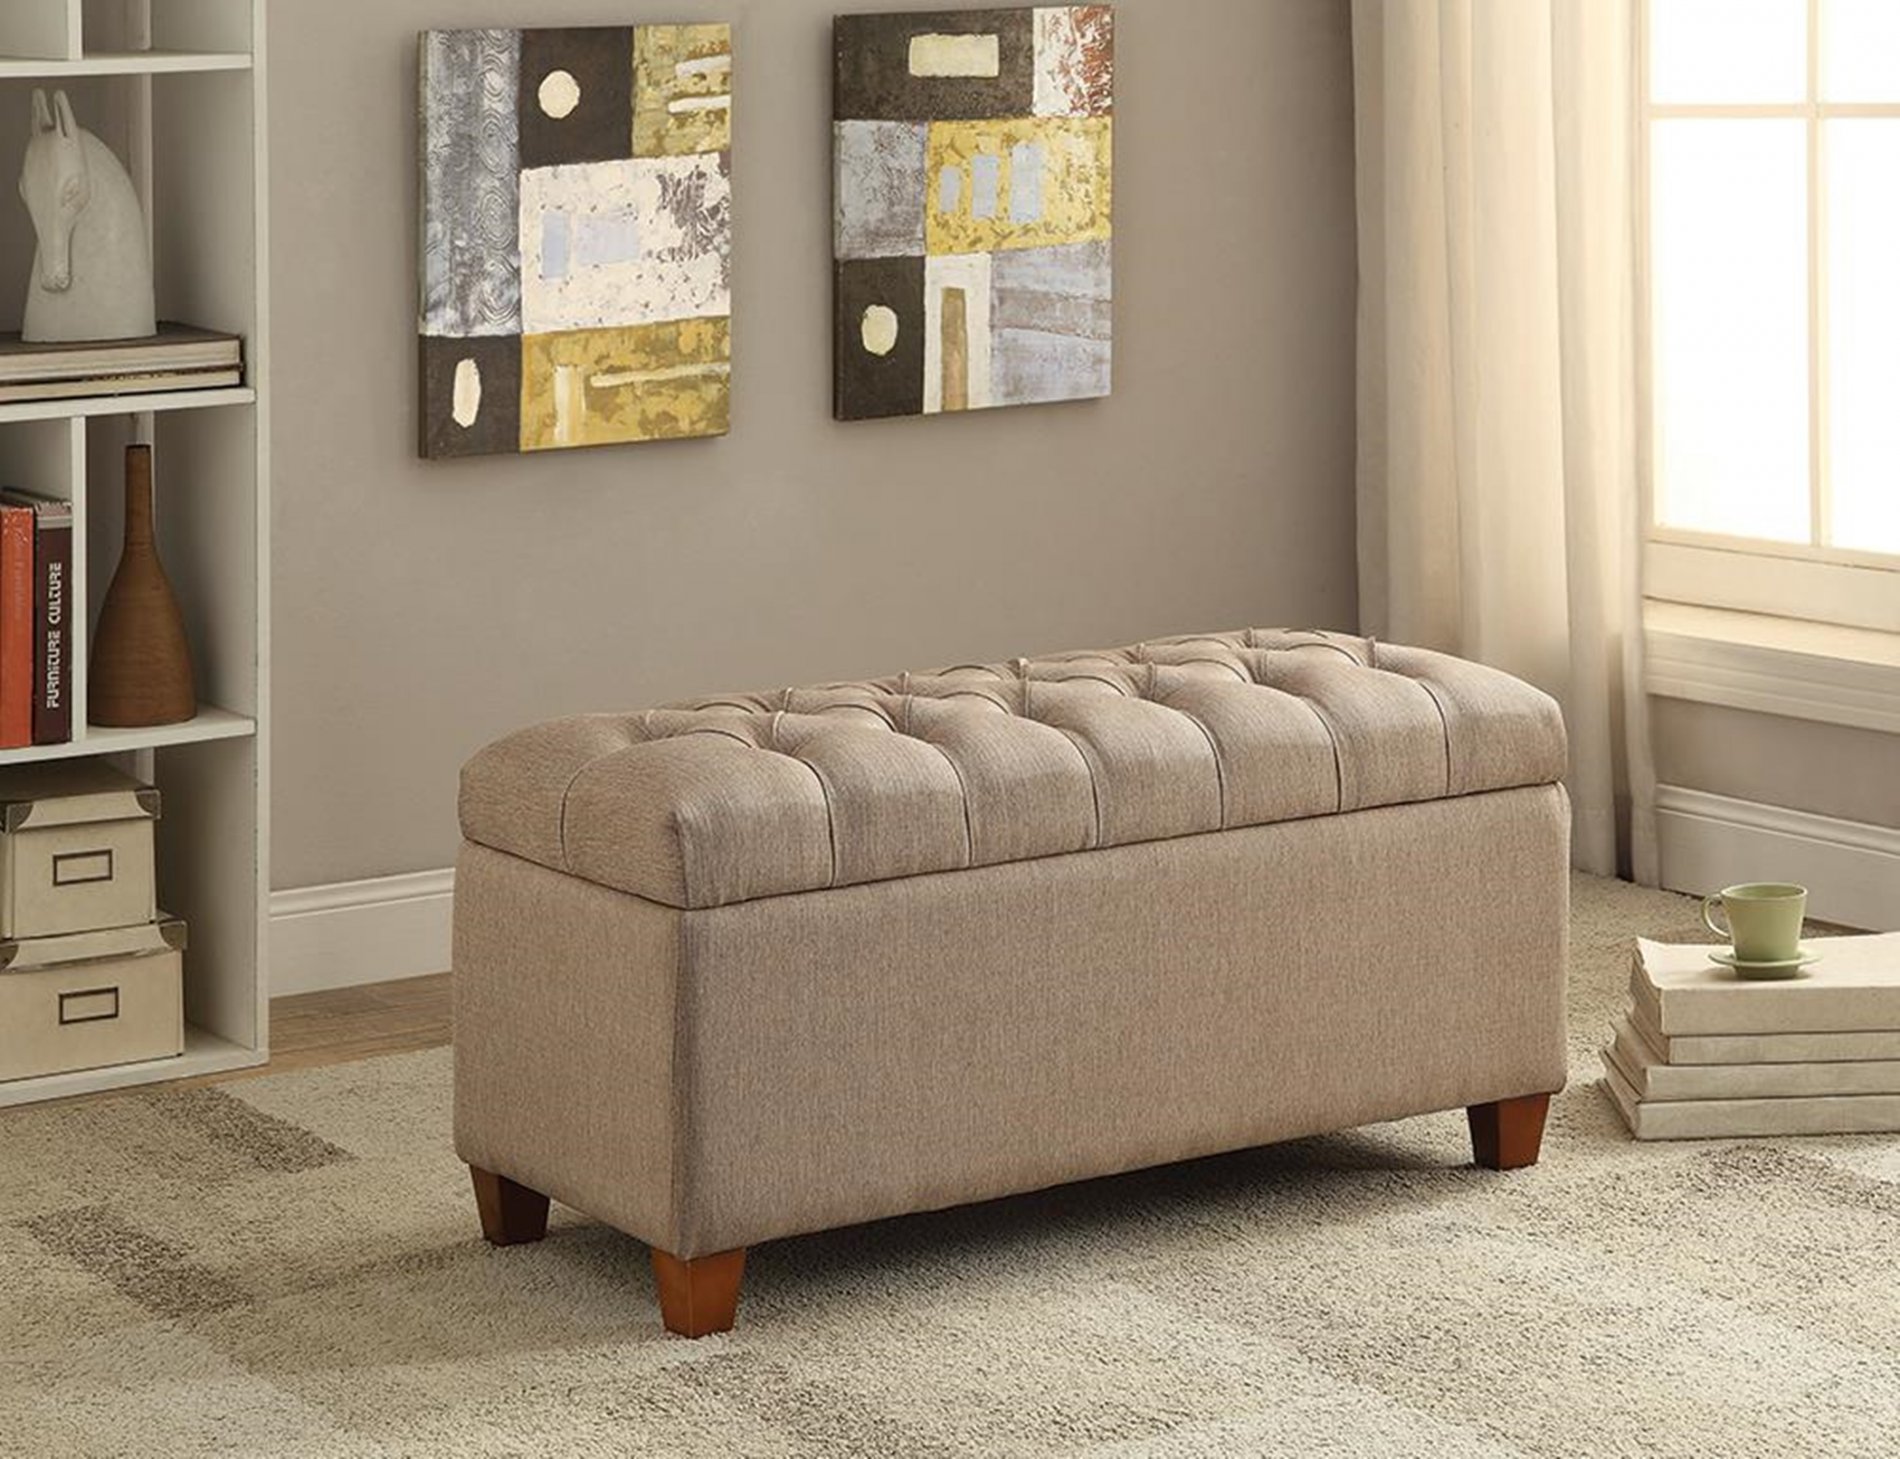 Tufted Taupe Storage Bench - Click Image to Close